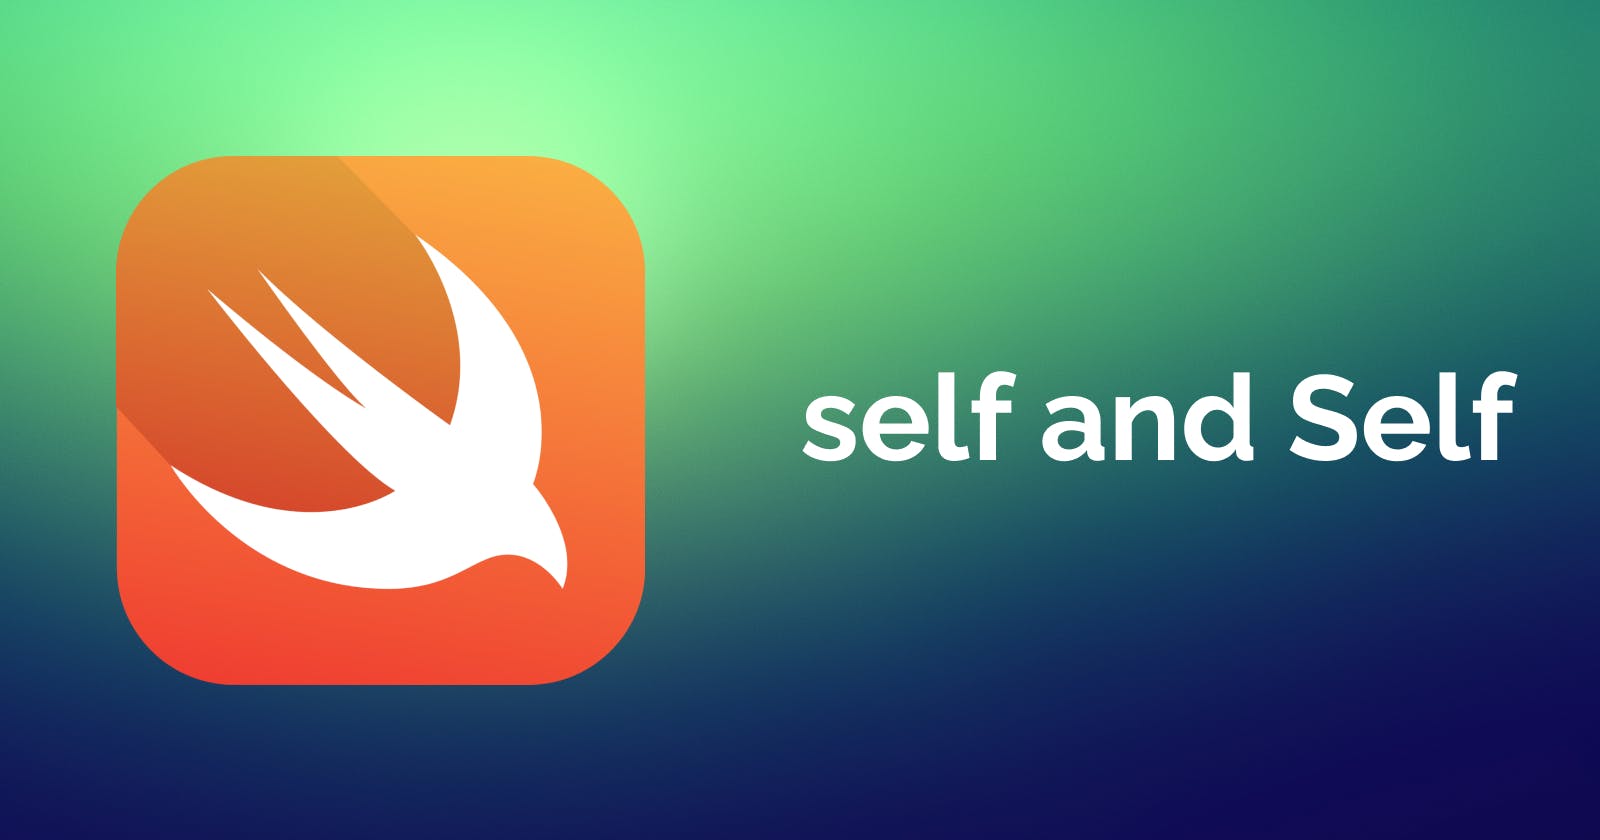 Difference between self and Self in Swift